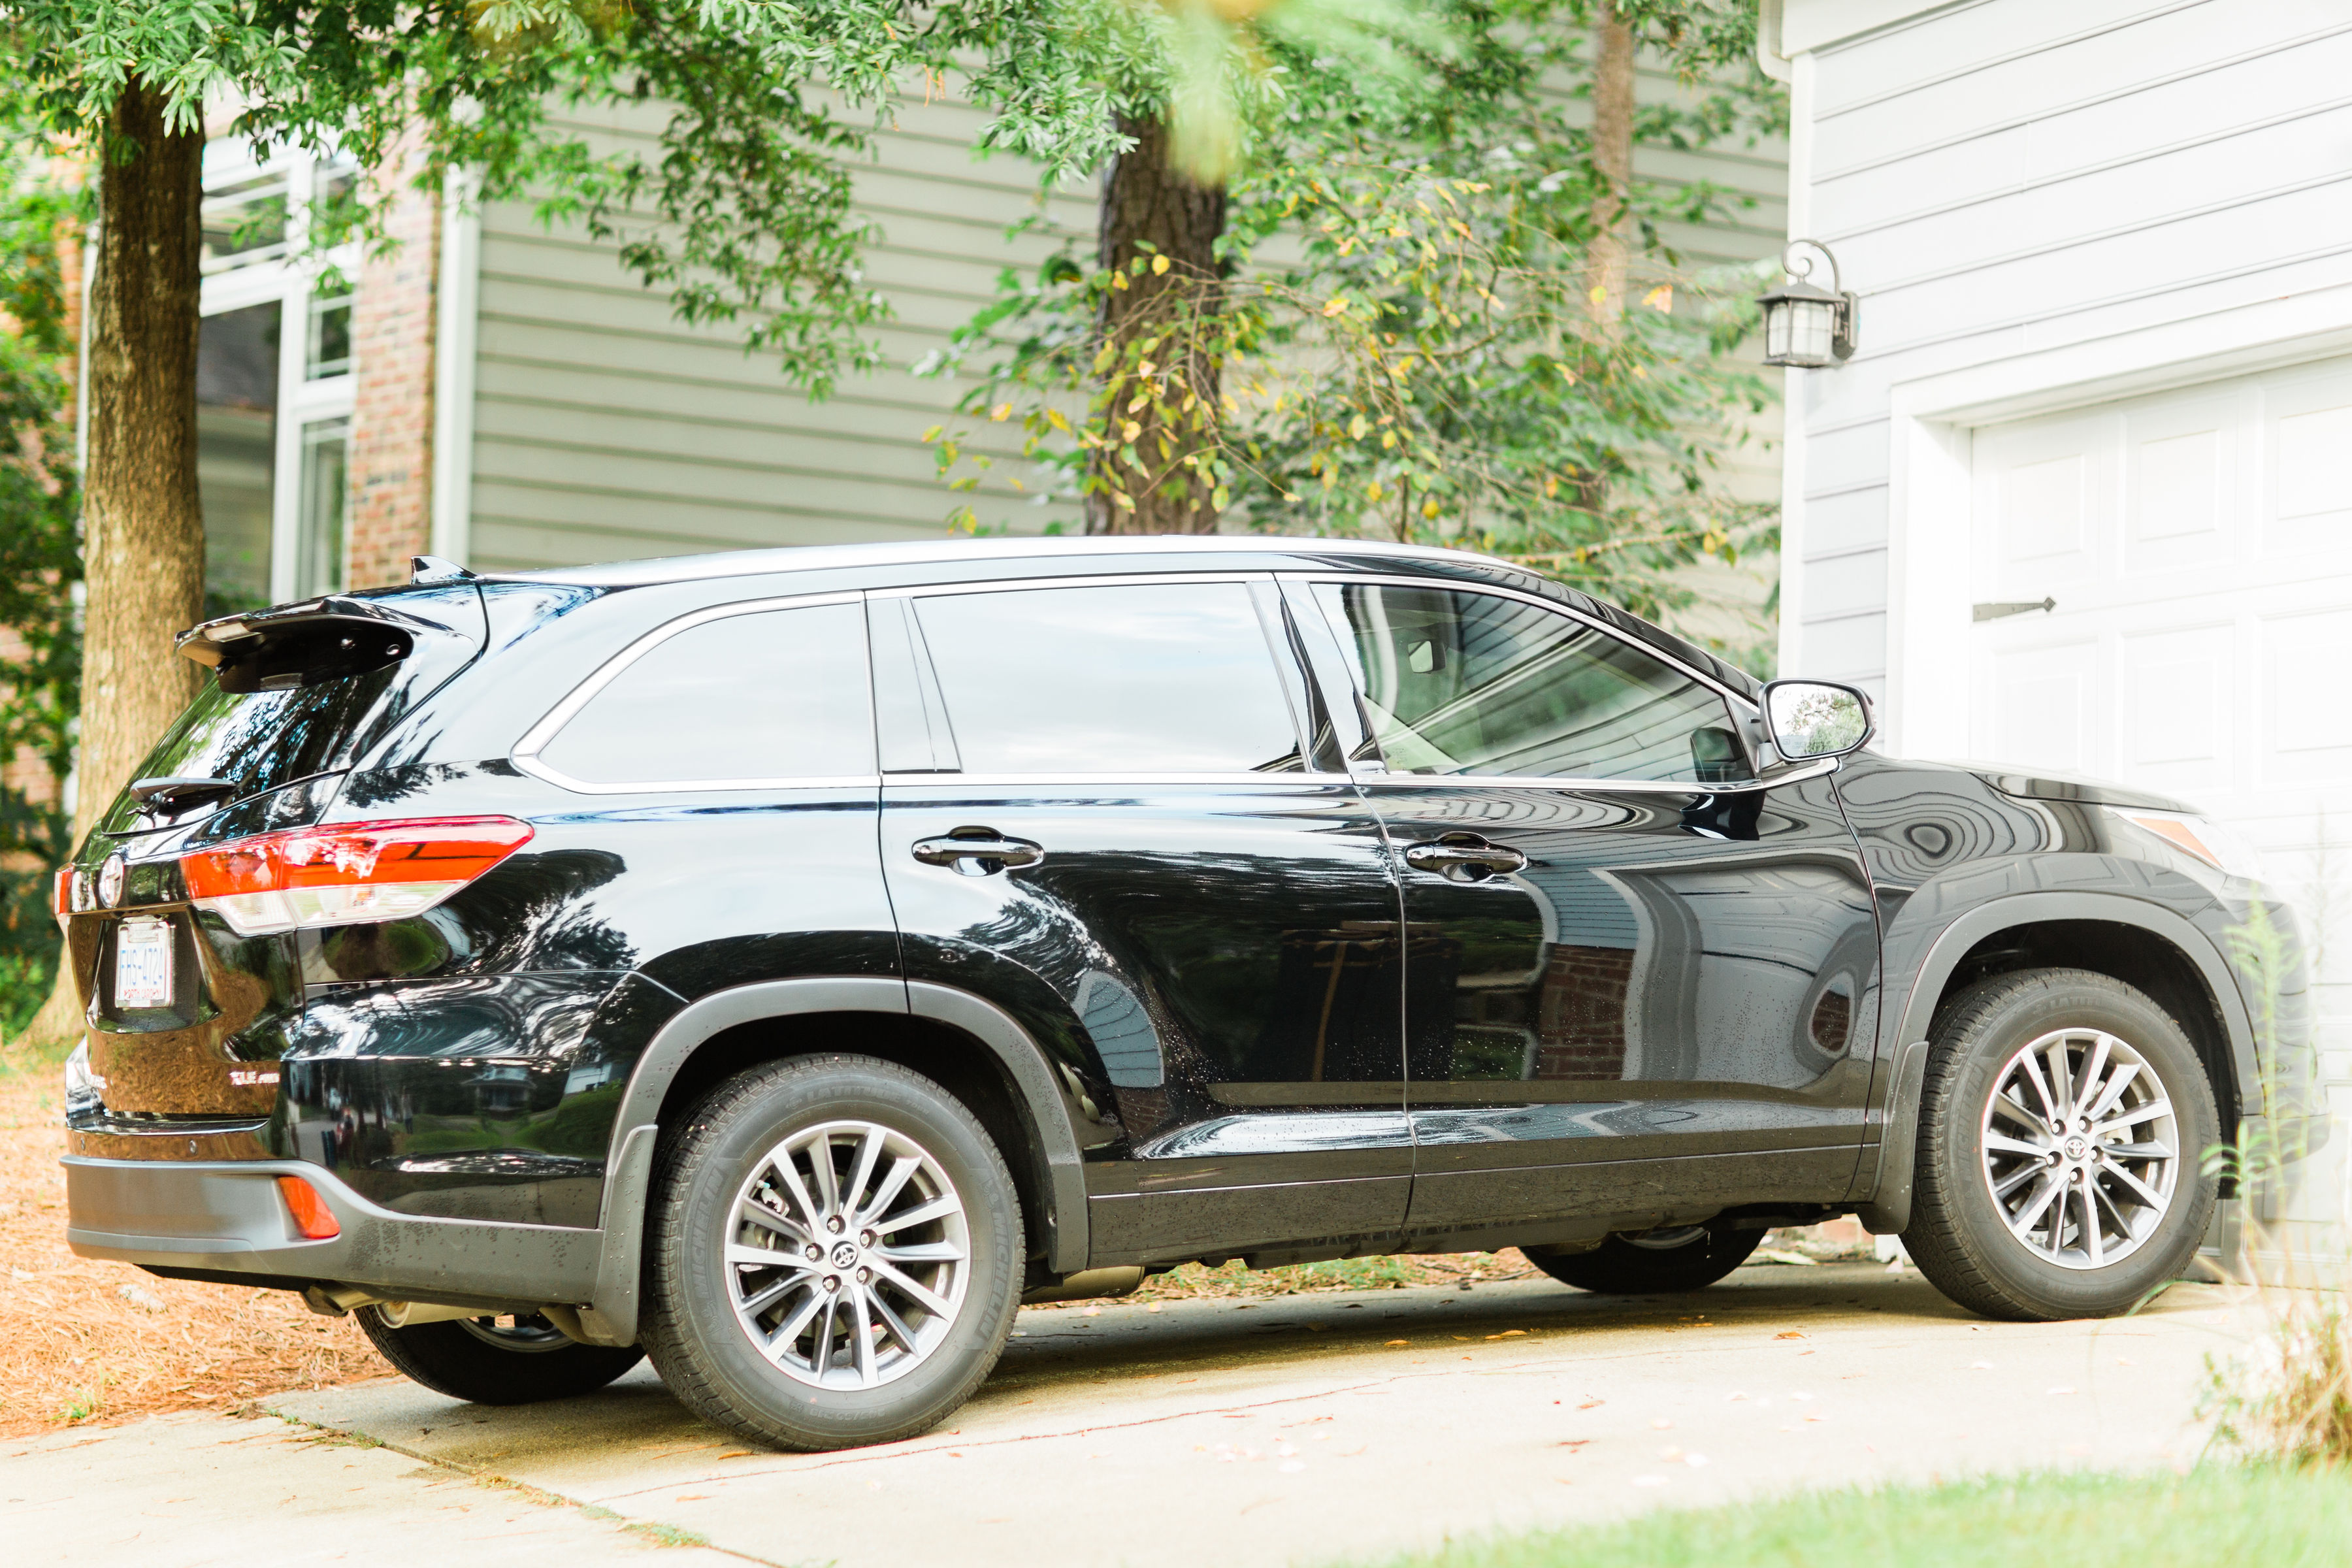 On the search for the perfect family car for your growing family?  #LetsGoPlaces #familycar #toyotahighlander #SUV | glitterinc.com | @glitterinc